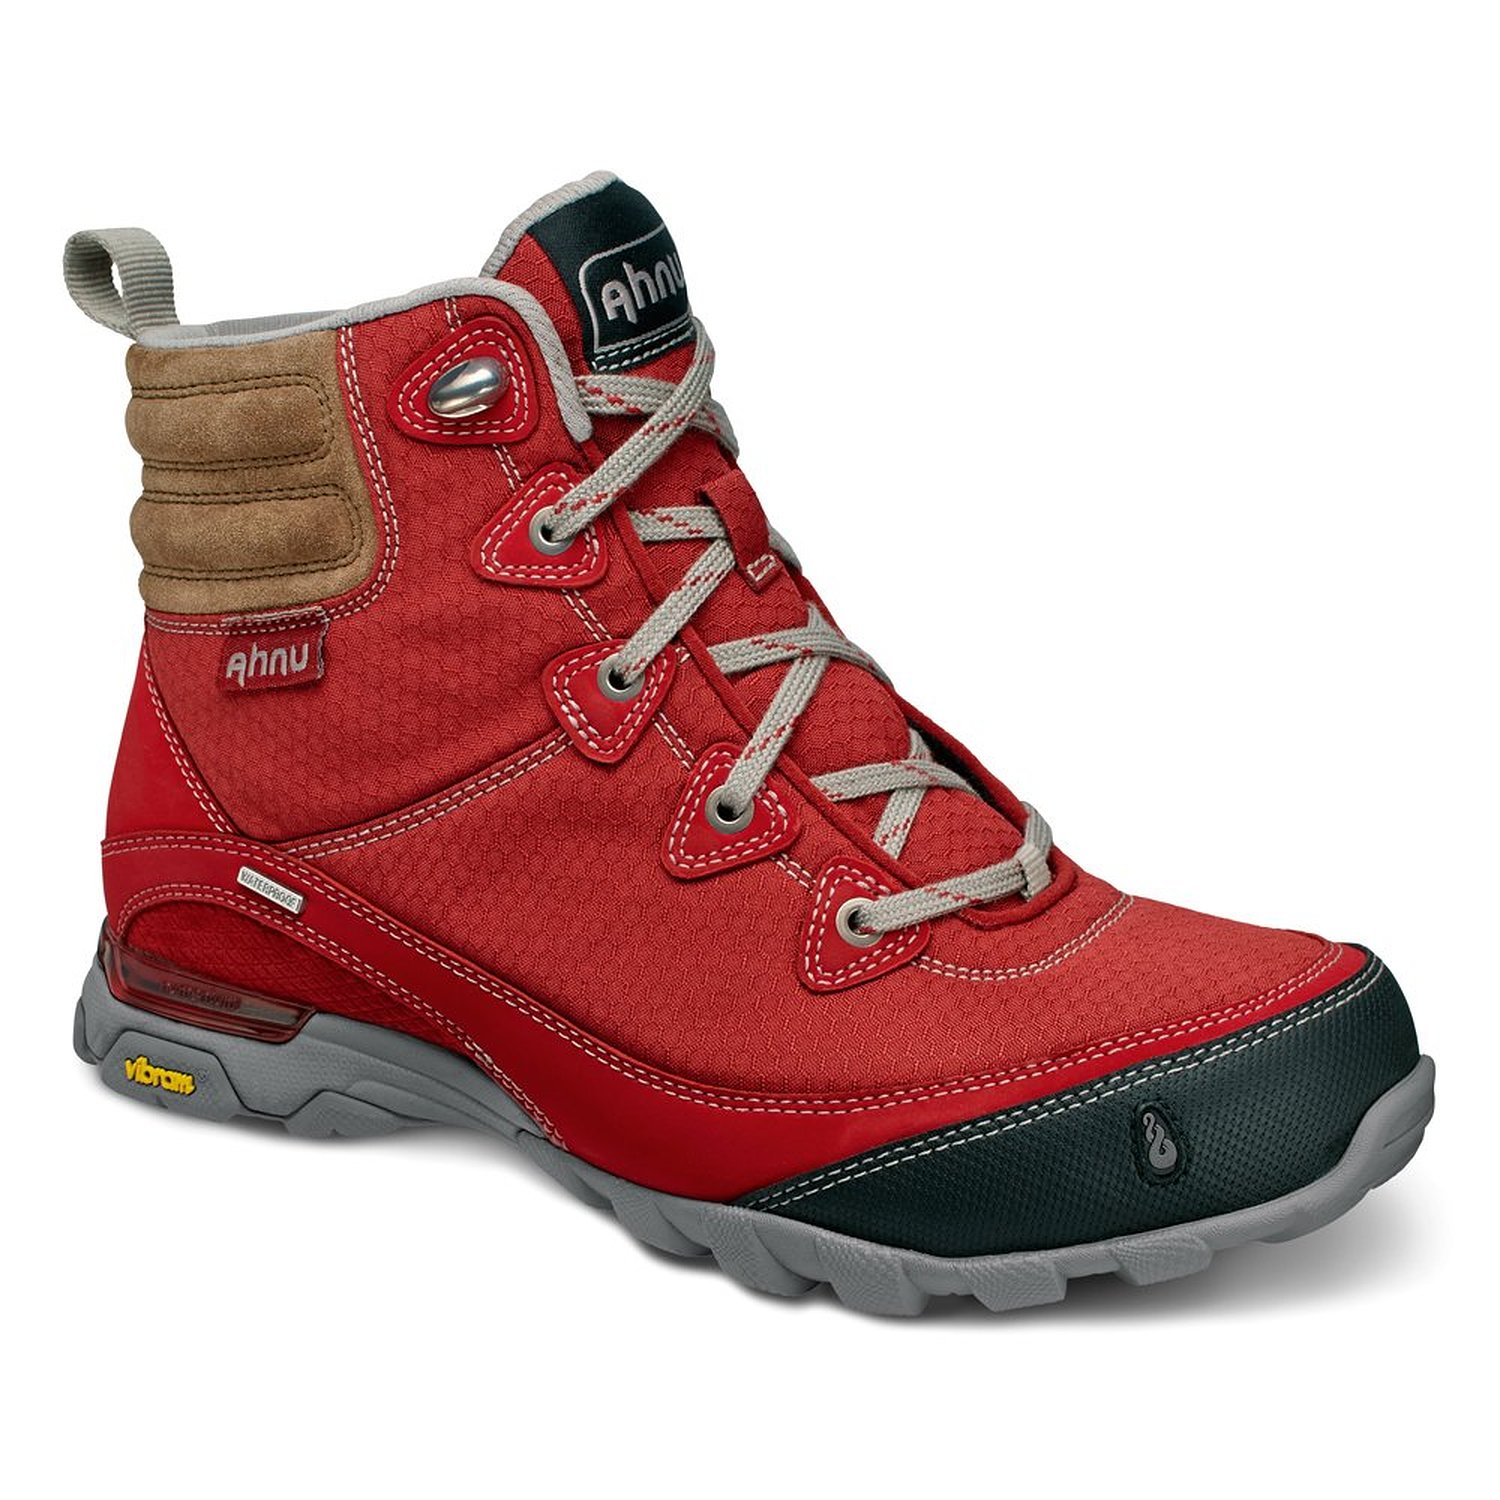 Things to pack for travel in monsoon - Waterproof hiking boot